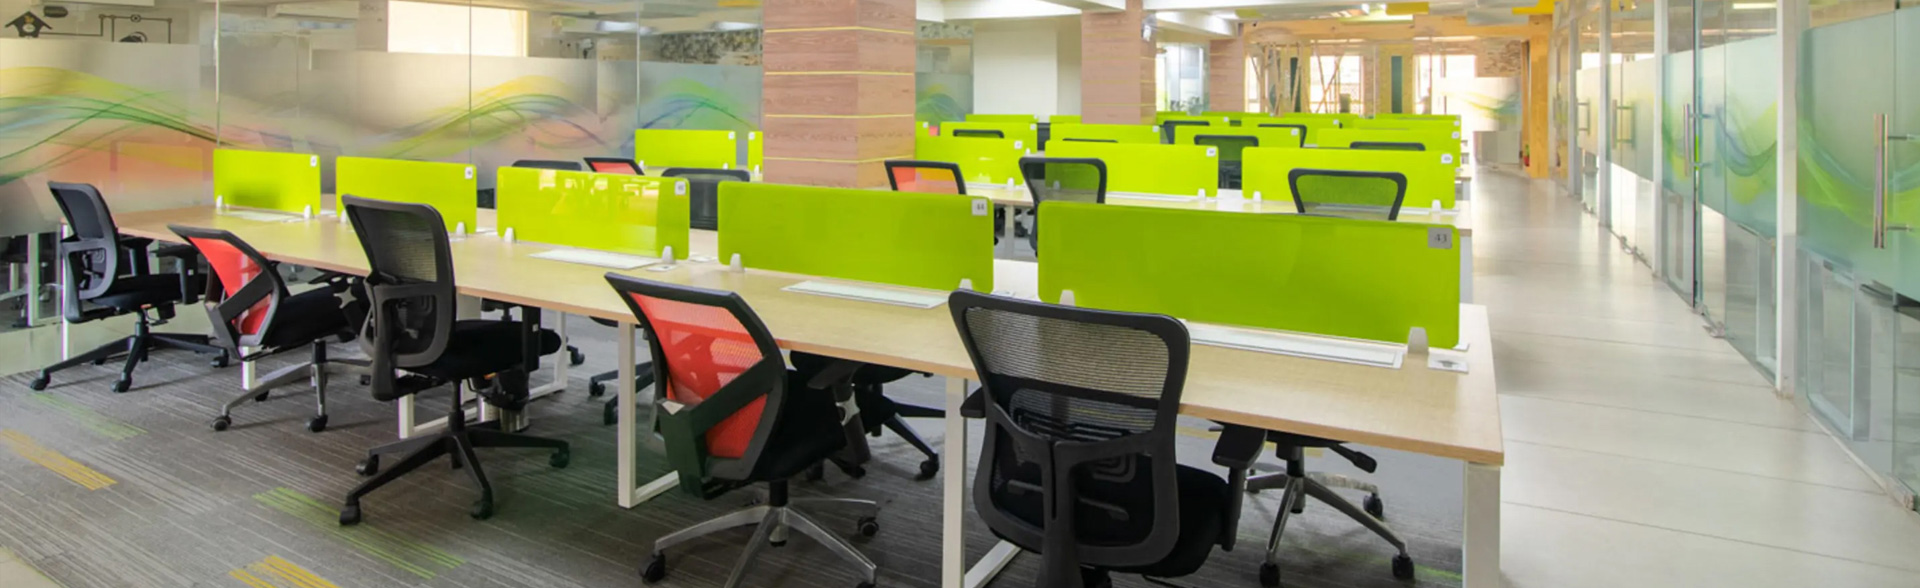 Office Furniture Made by Excel Furntiure